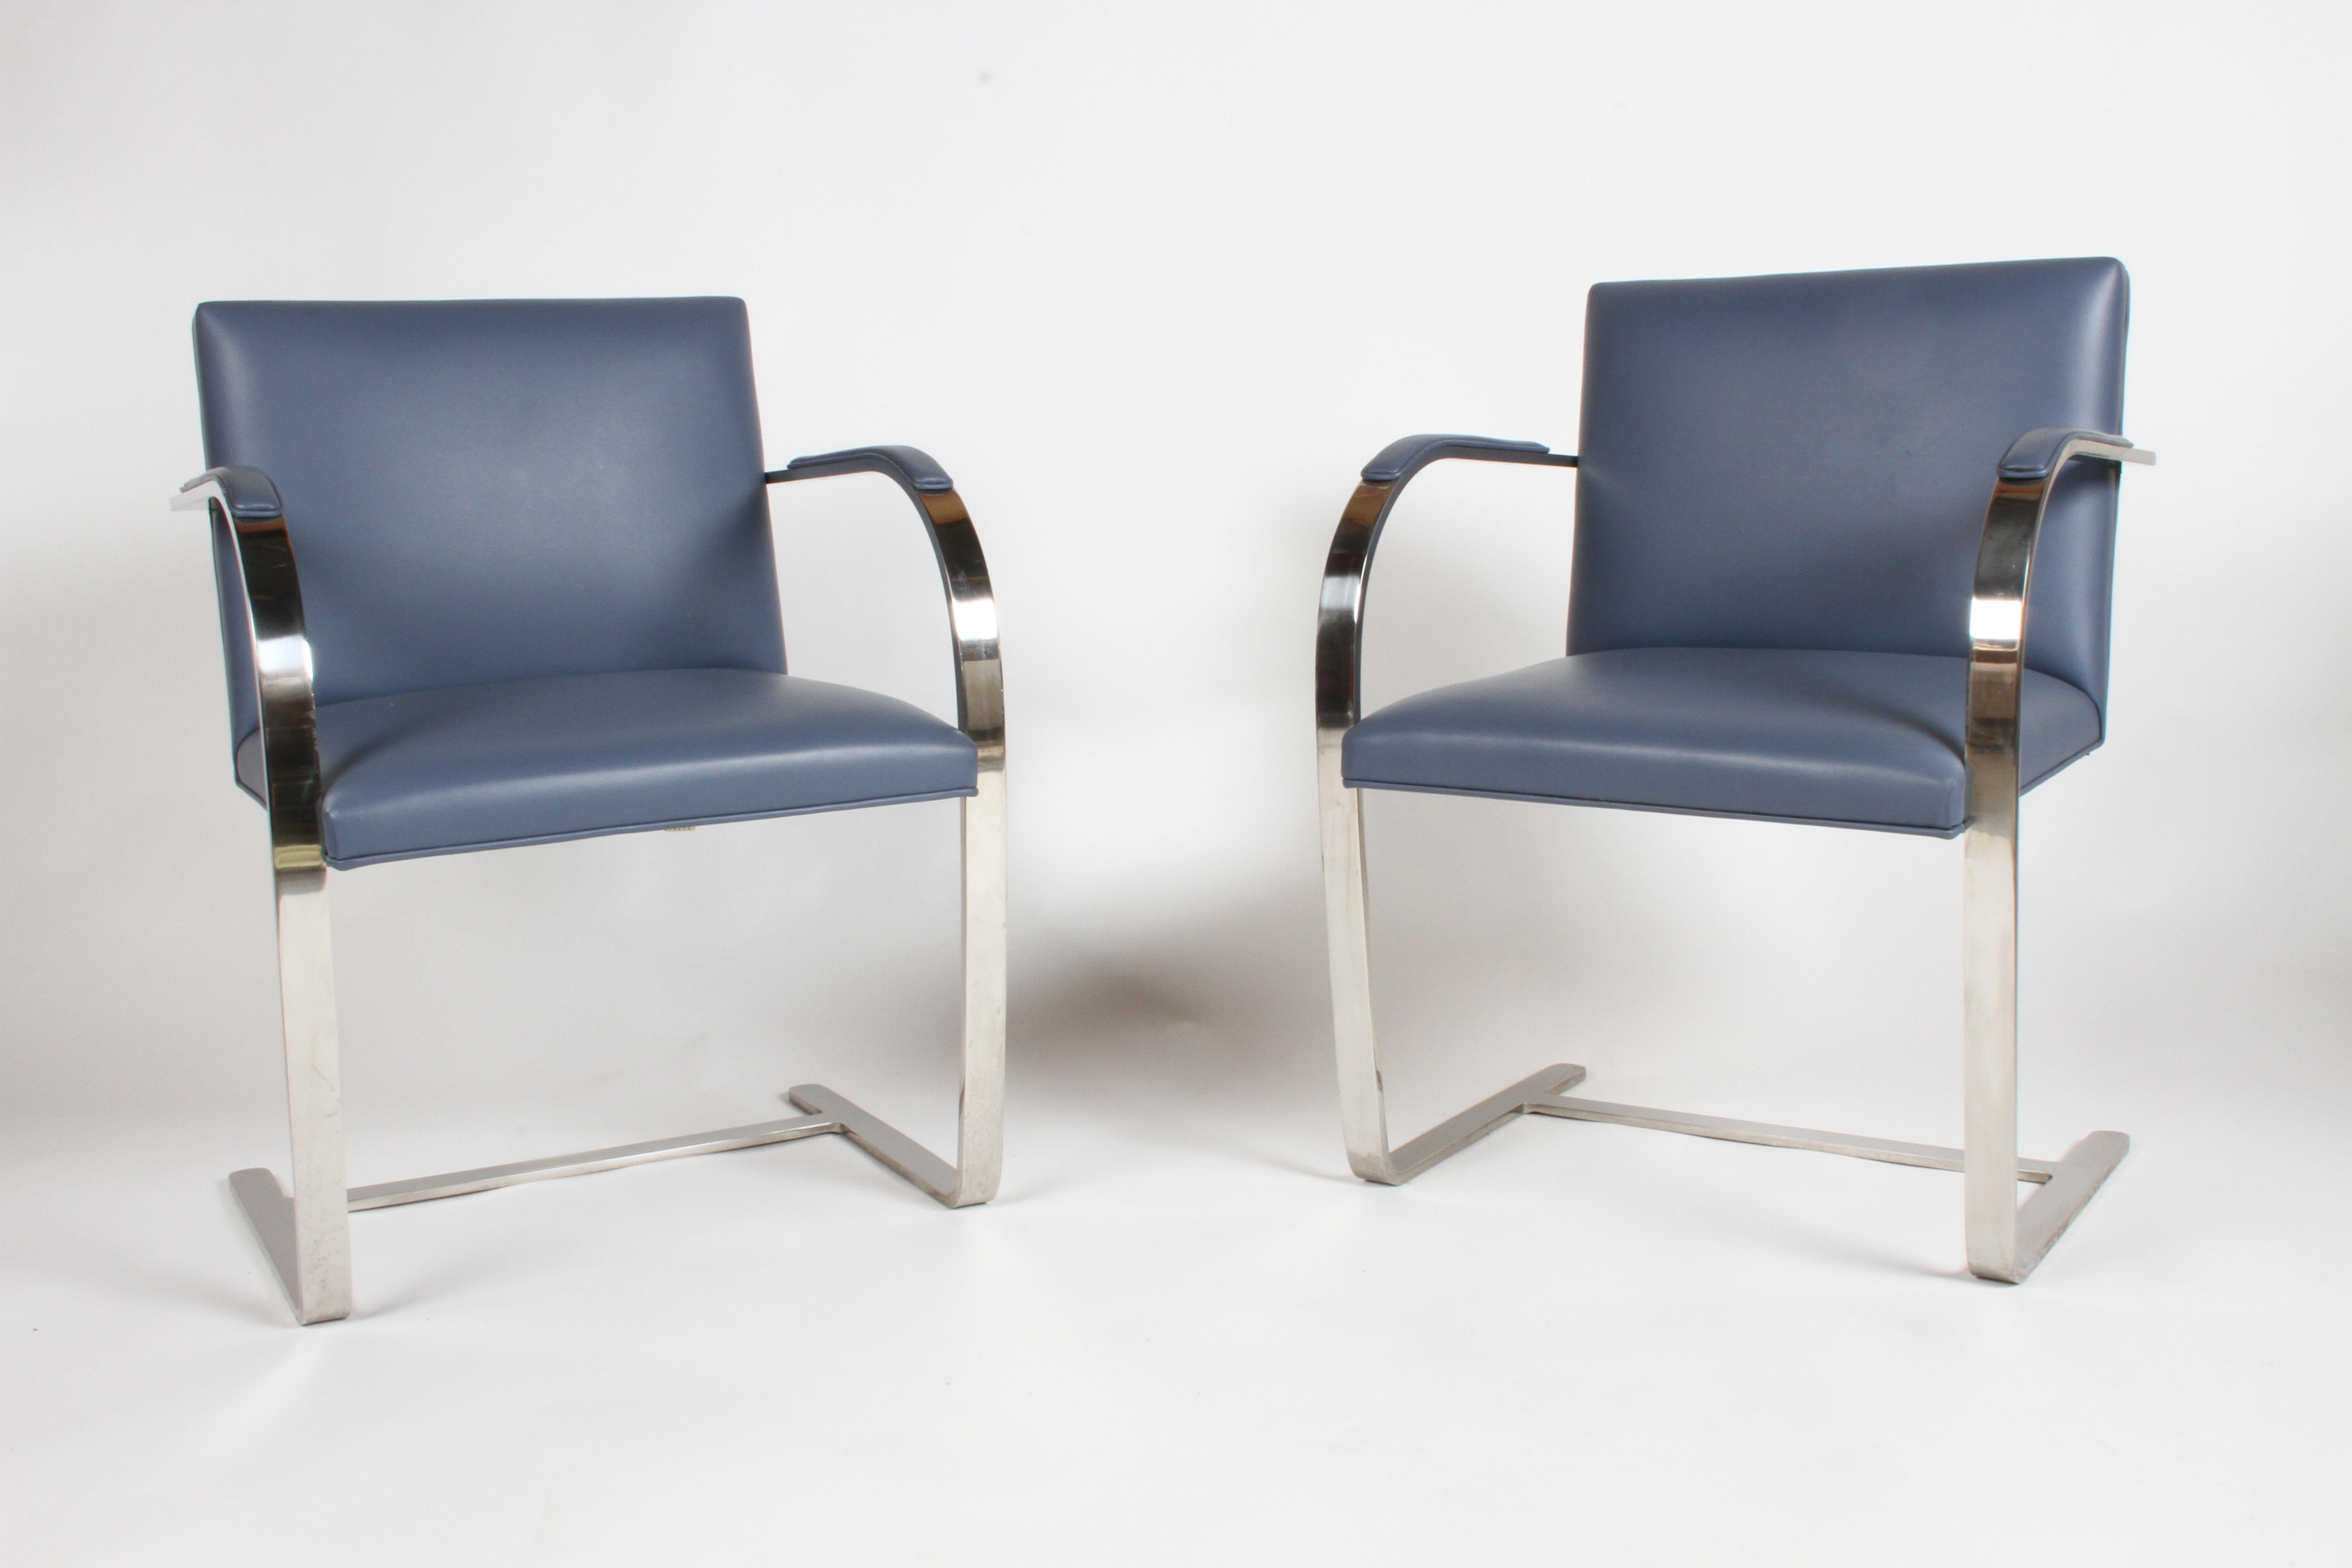 American Mies van der Rohe Flat Bar Brno Chairs by Knoll, Stainless